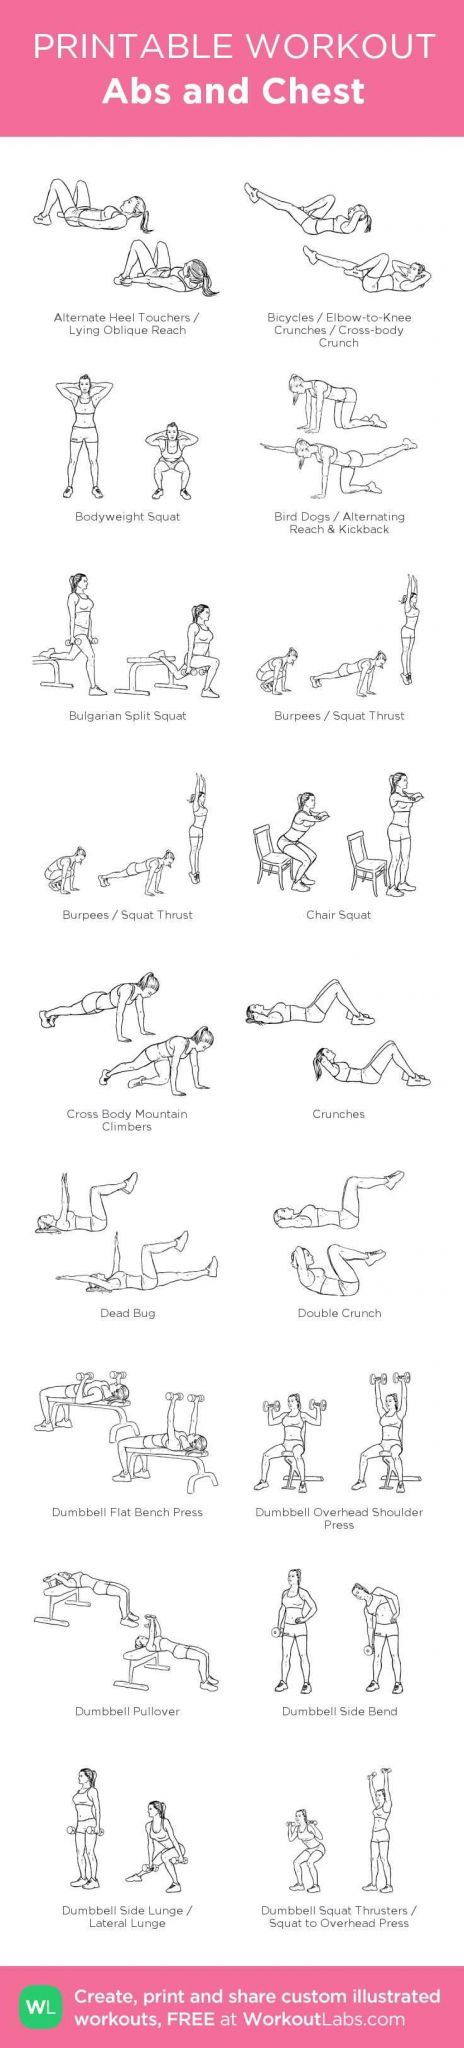 Body Beast Worksheets together with 2040 Best Health and Fitness Images On Pinterest